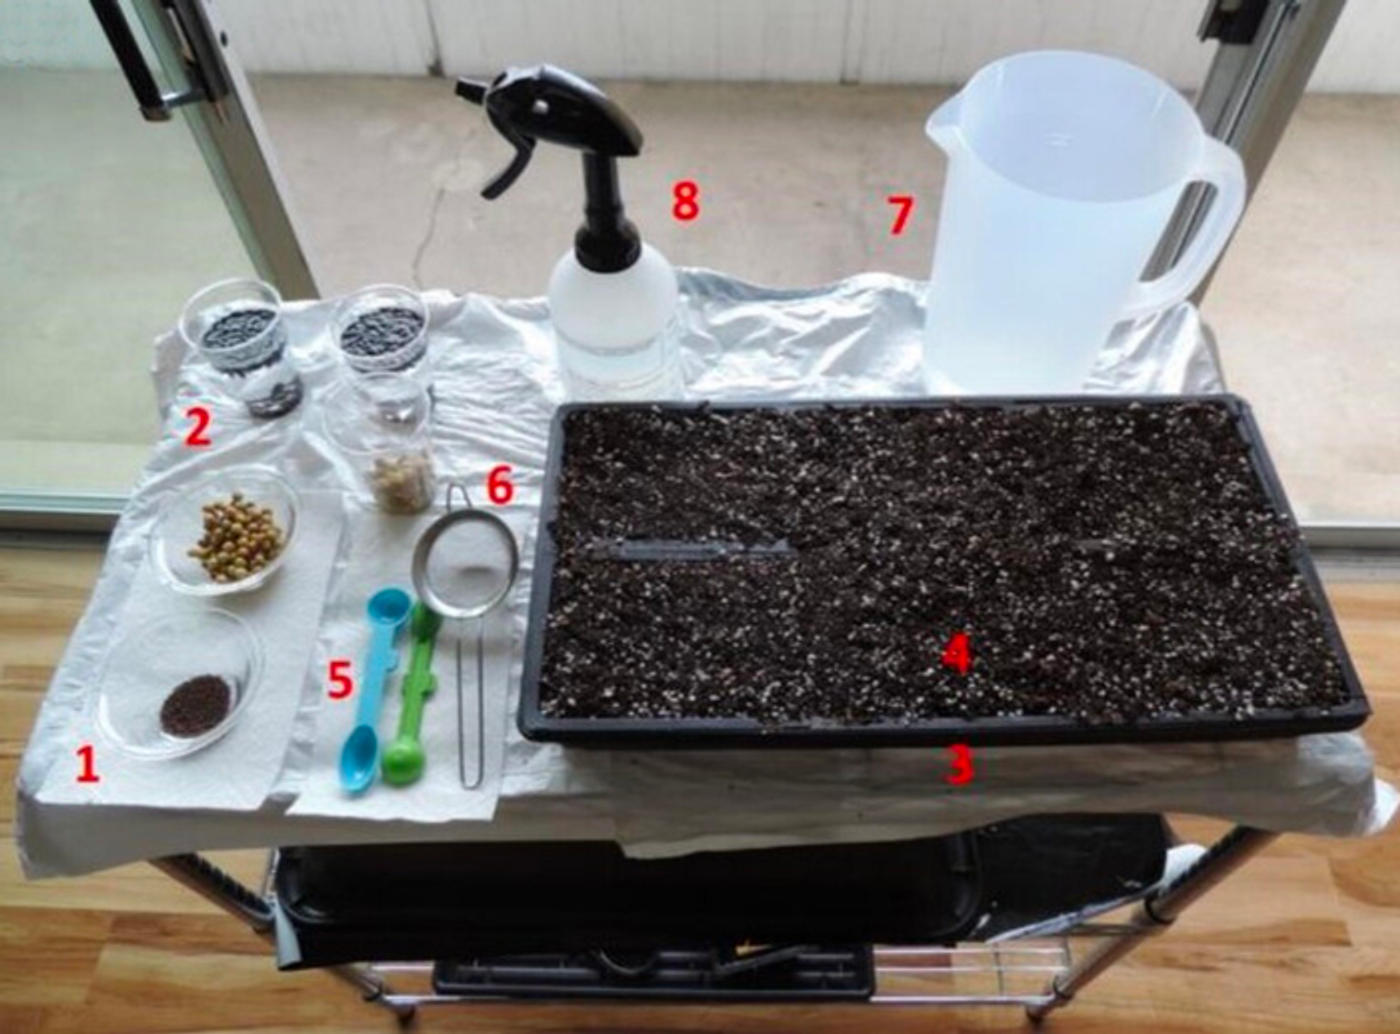 The basics for micro green cultivation at home: 1) seeds, 2) small cups to soak seeds in water, 3) growth trays, 4) growing medium, 5) measuring cups for seeds, 6) colander, 7) pitcher, and 8) spray bottle. / Credit: Francesco Di Gioia, Penn State